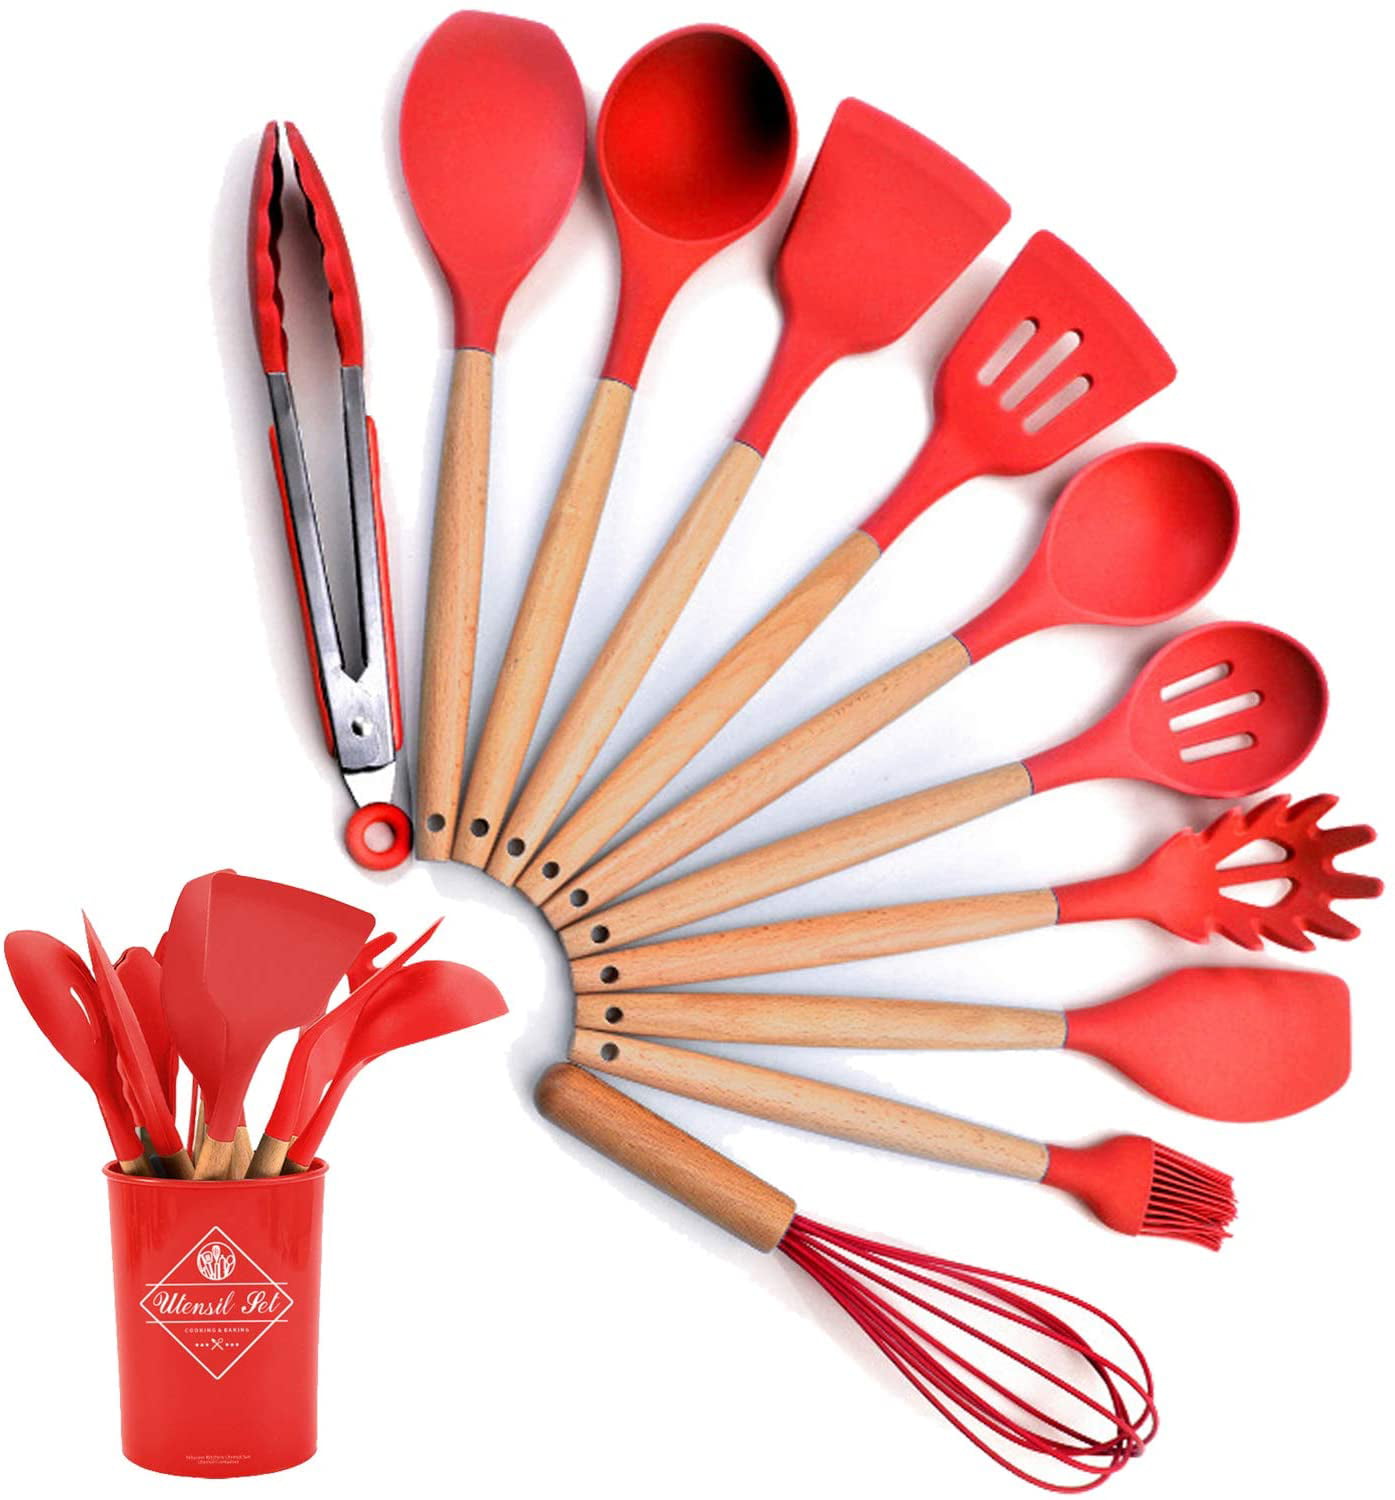 Dreamfarm Set of the Best Essential Kitchen Tool Collection Mixed Colors 